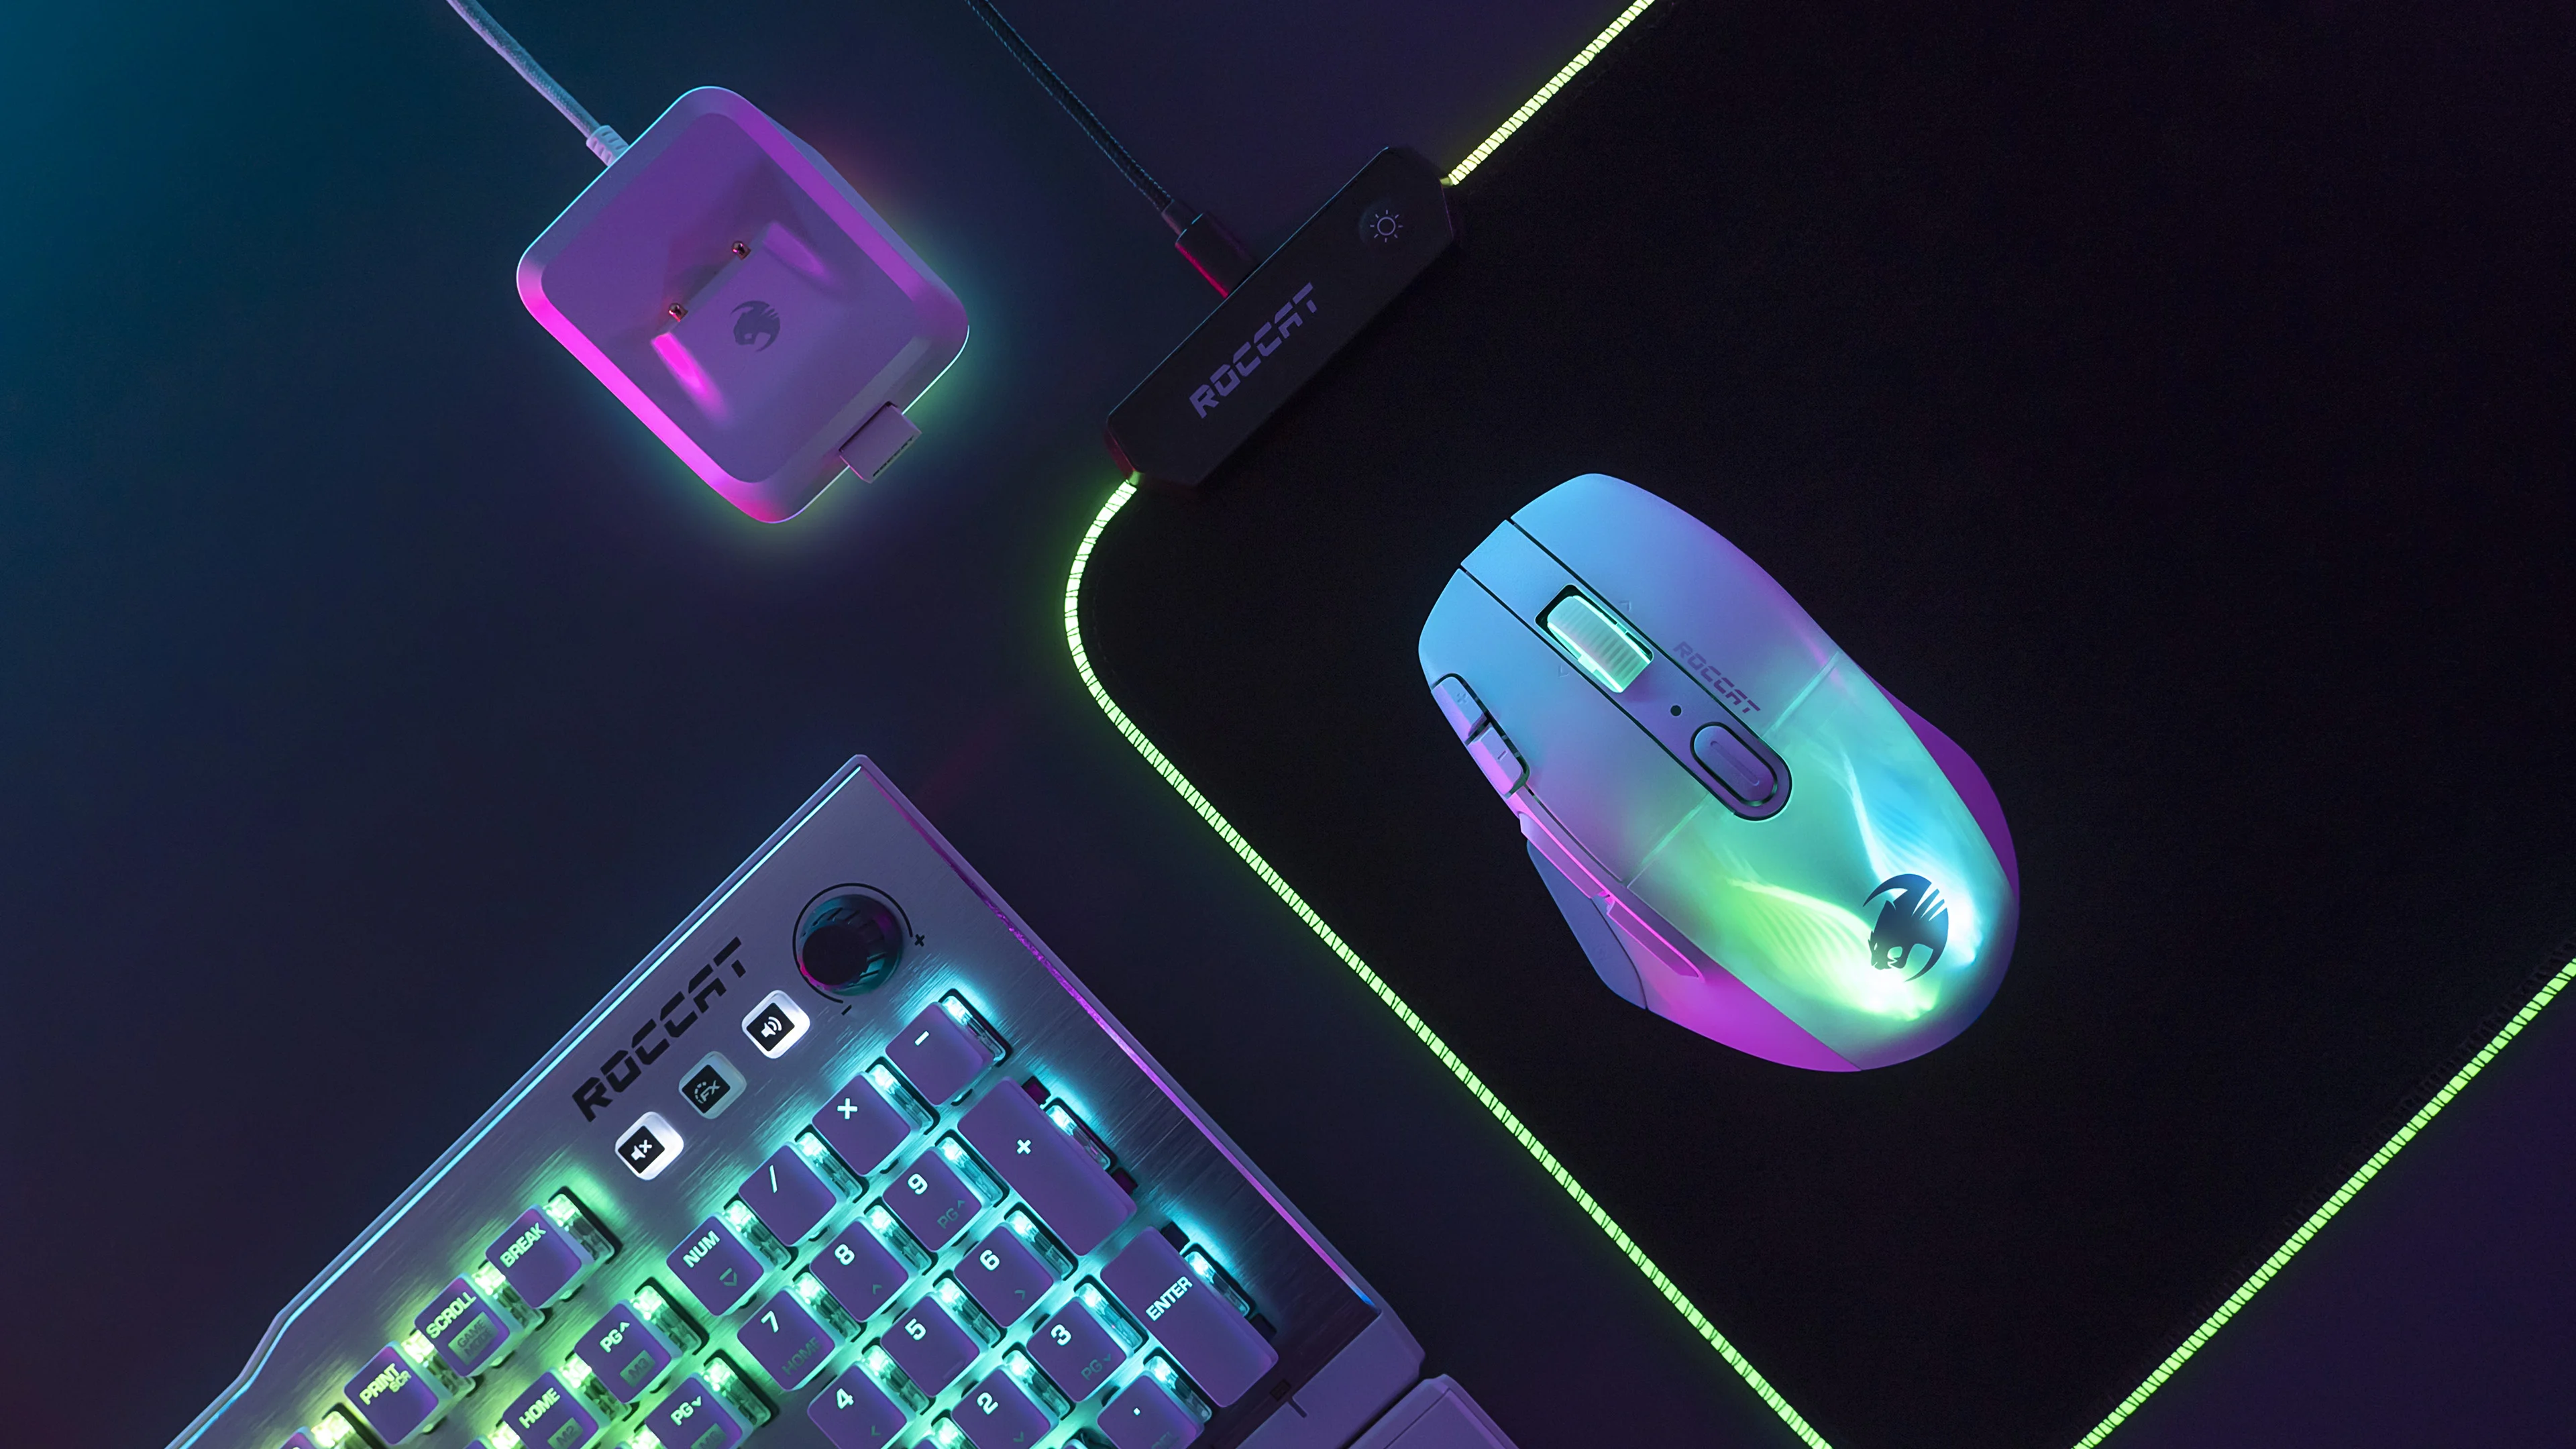 ROCCAT: presented the new Kone XP Air